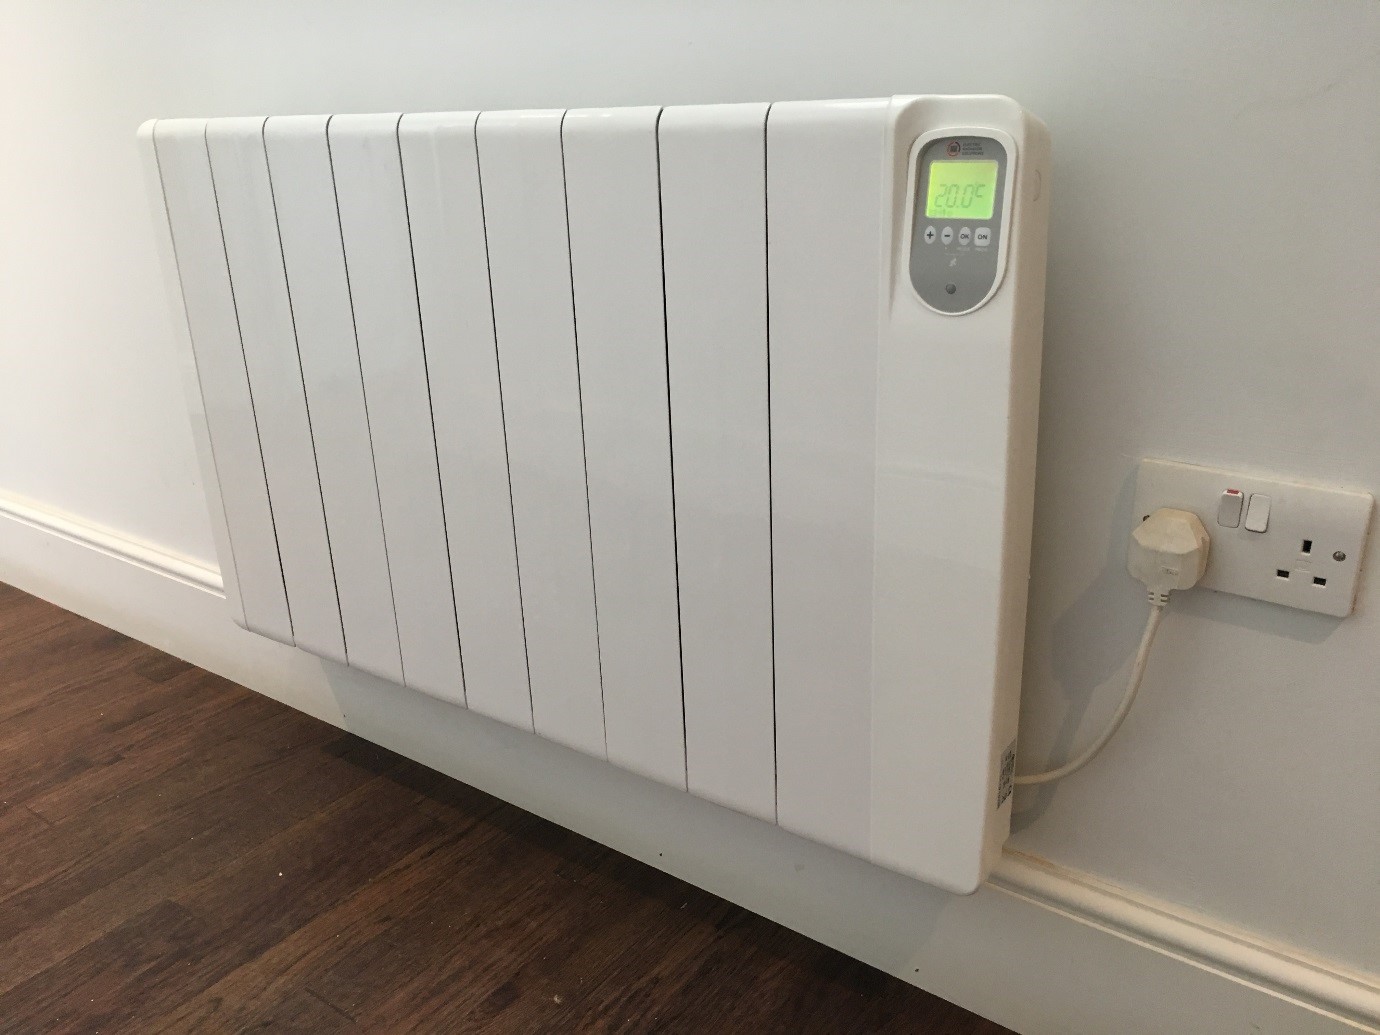 Stricter regulations are needed for electric heaters